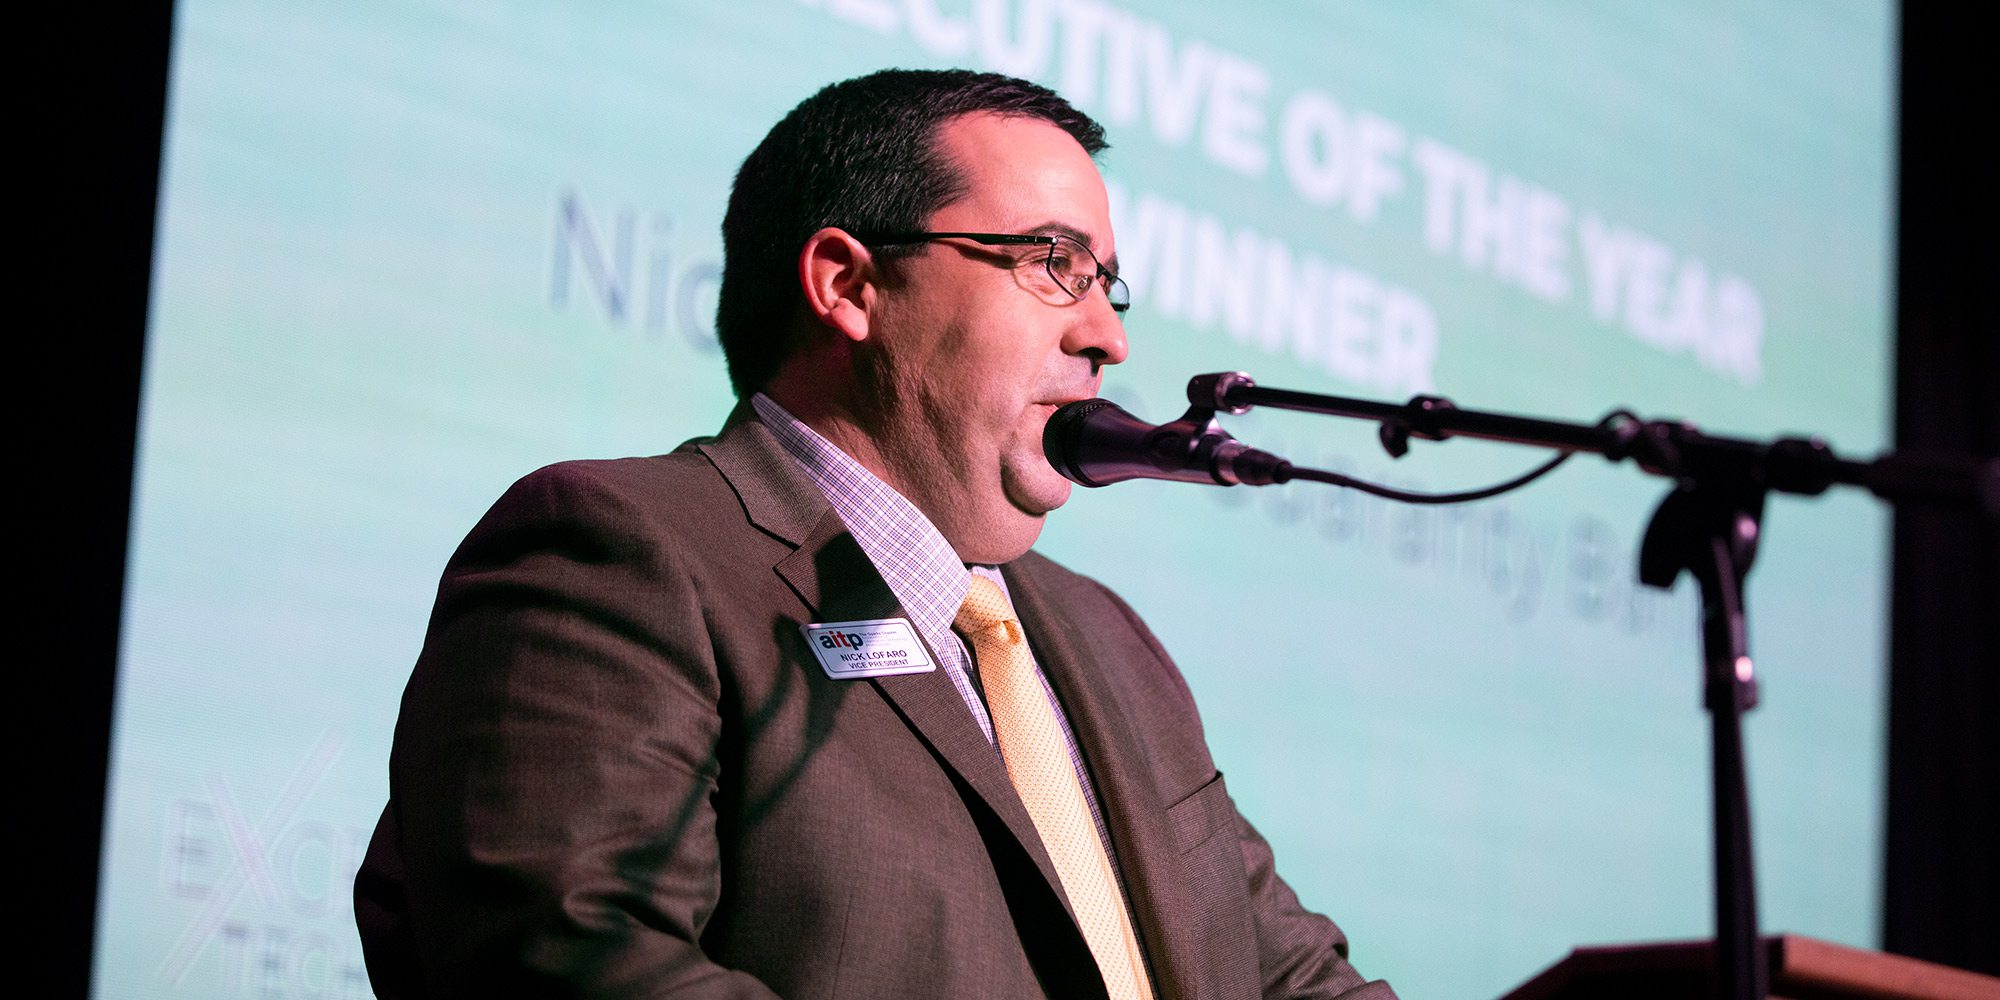 Nick Lofaro, Vice President and Chief Technology Officer at Guaranty Bank and the IT Executive of the Year